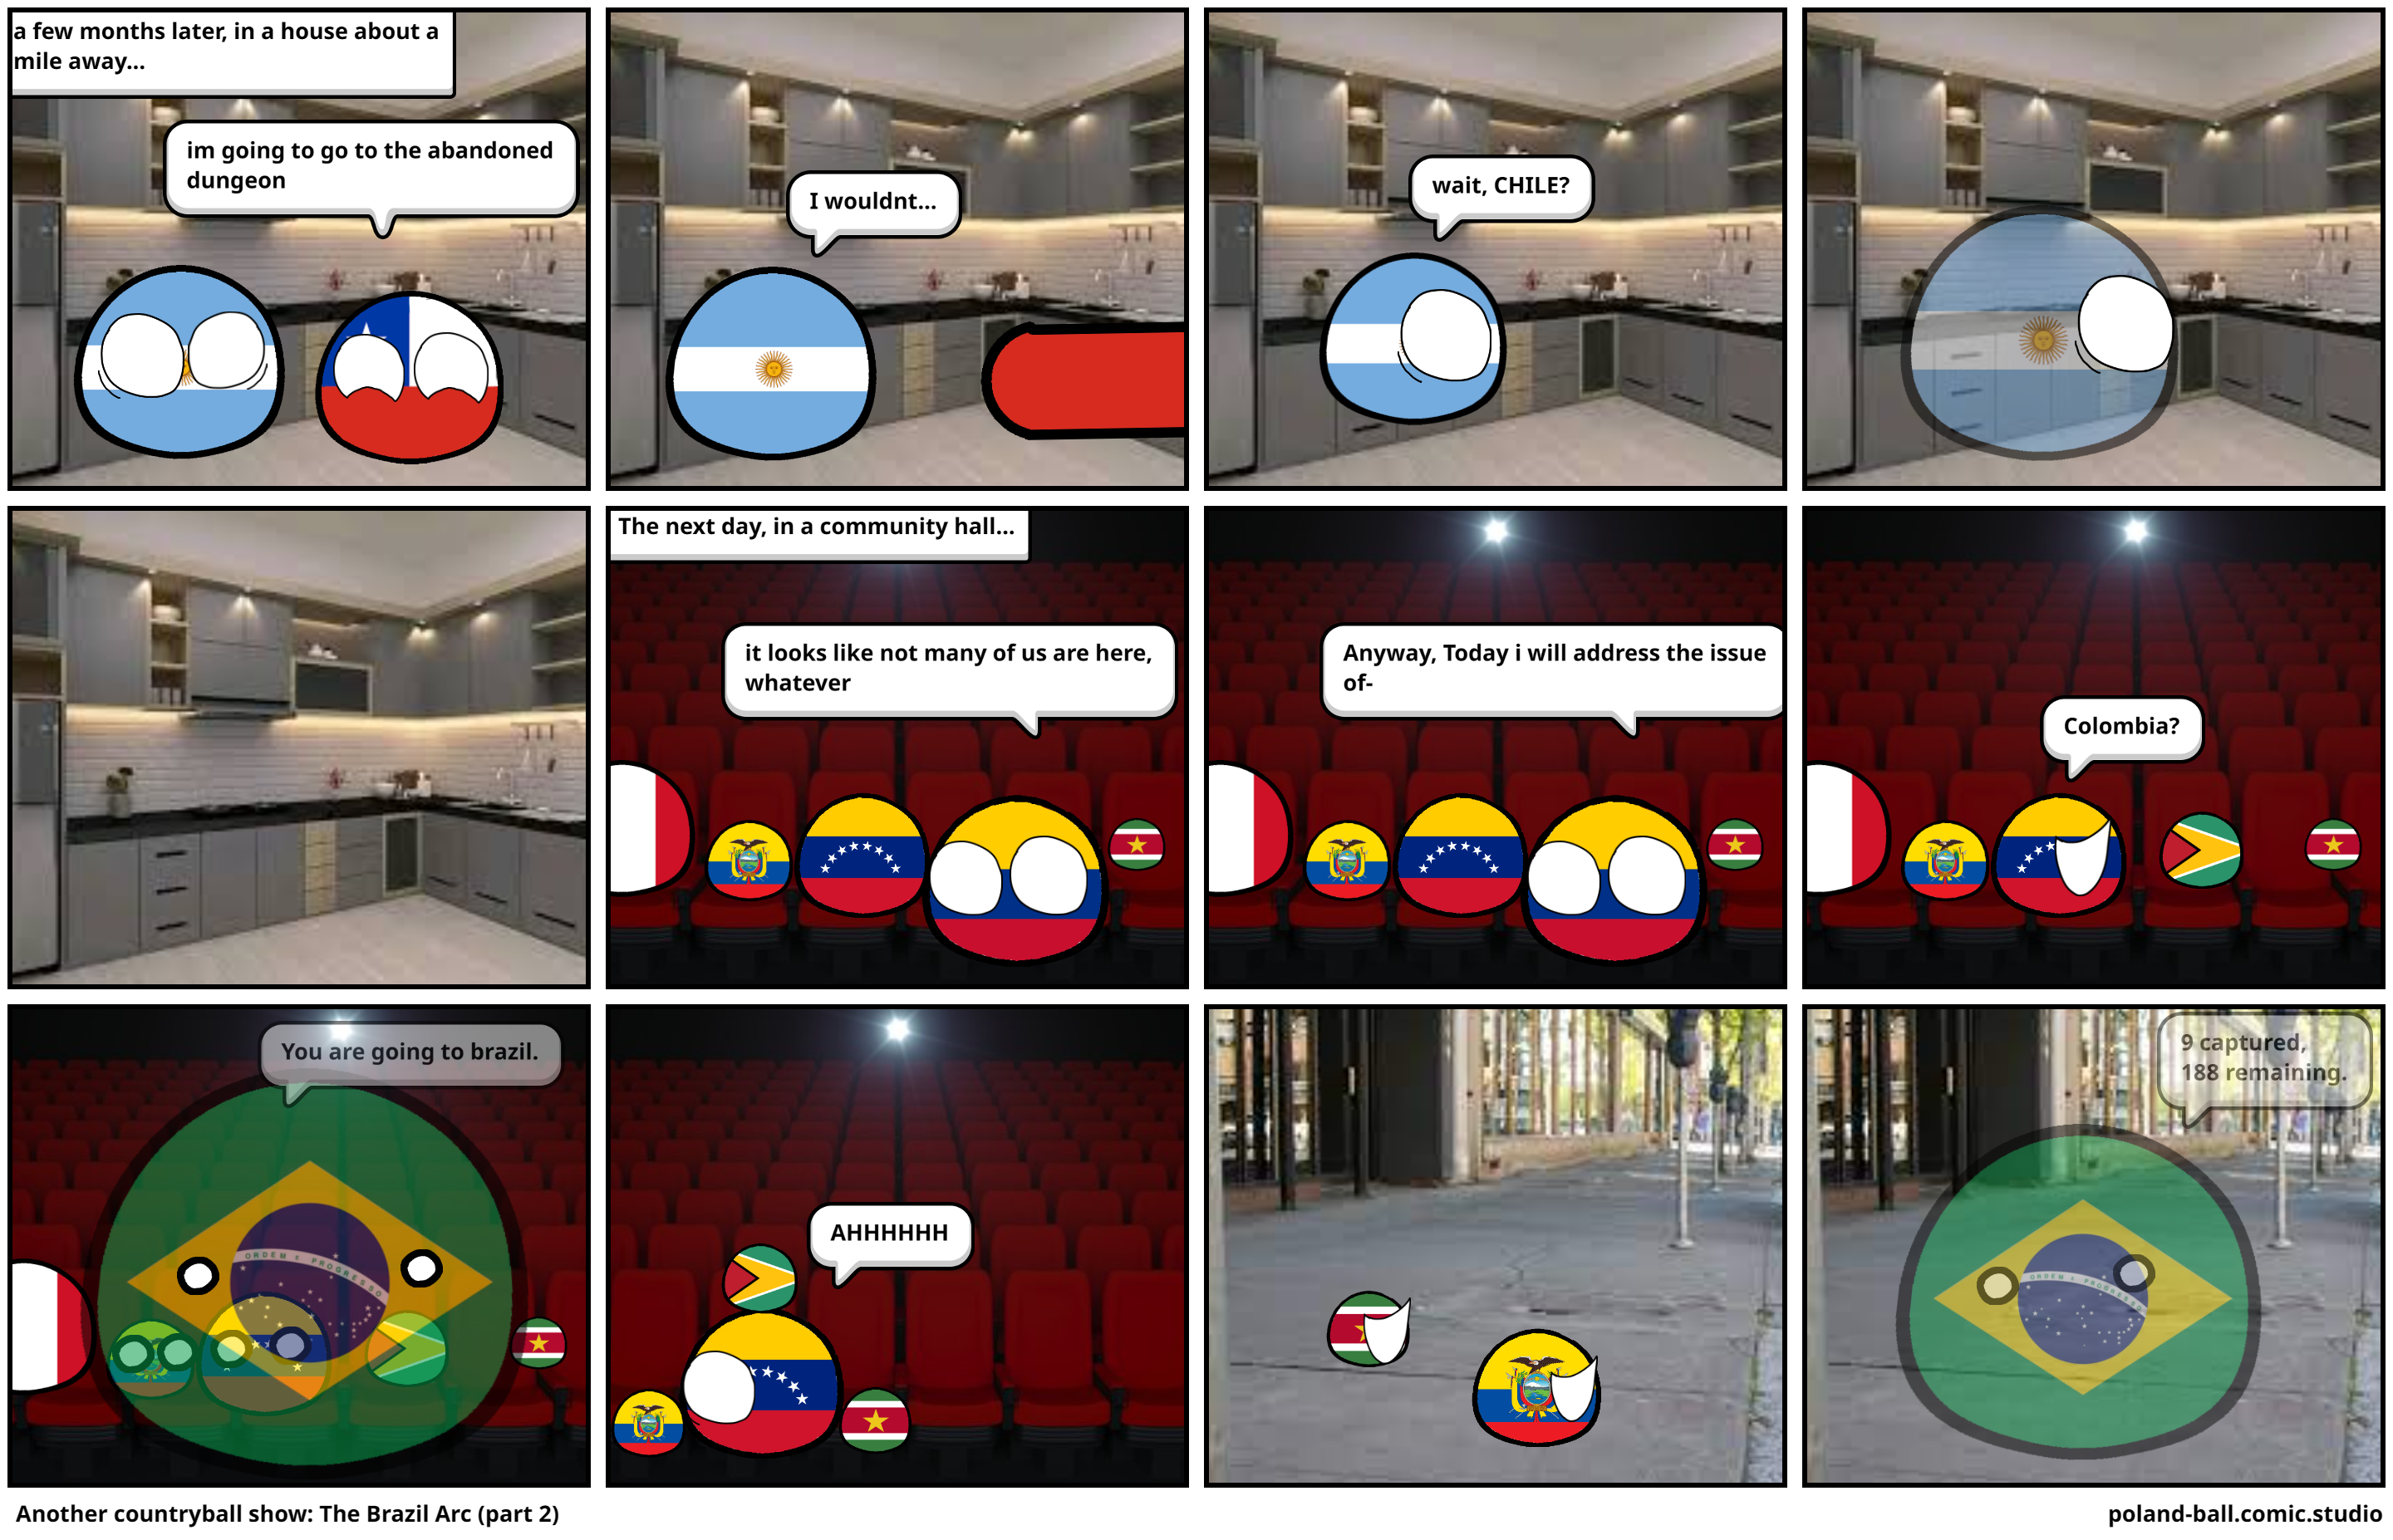  Another countryball show: The Brazil Arc (part 2)